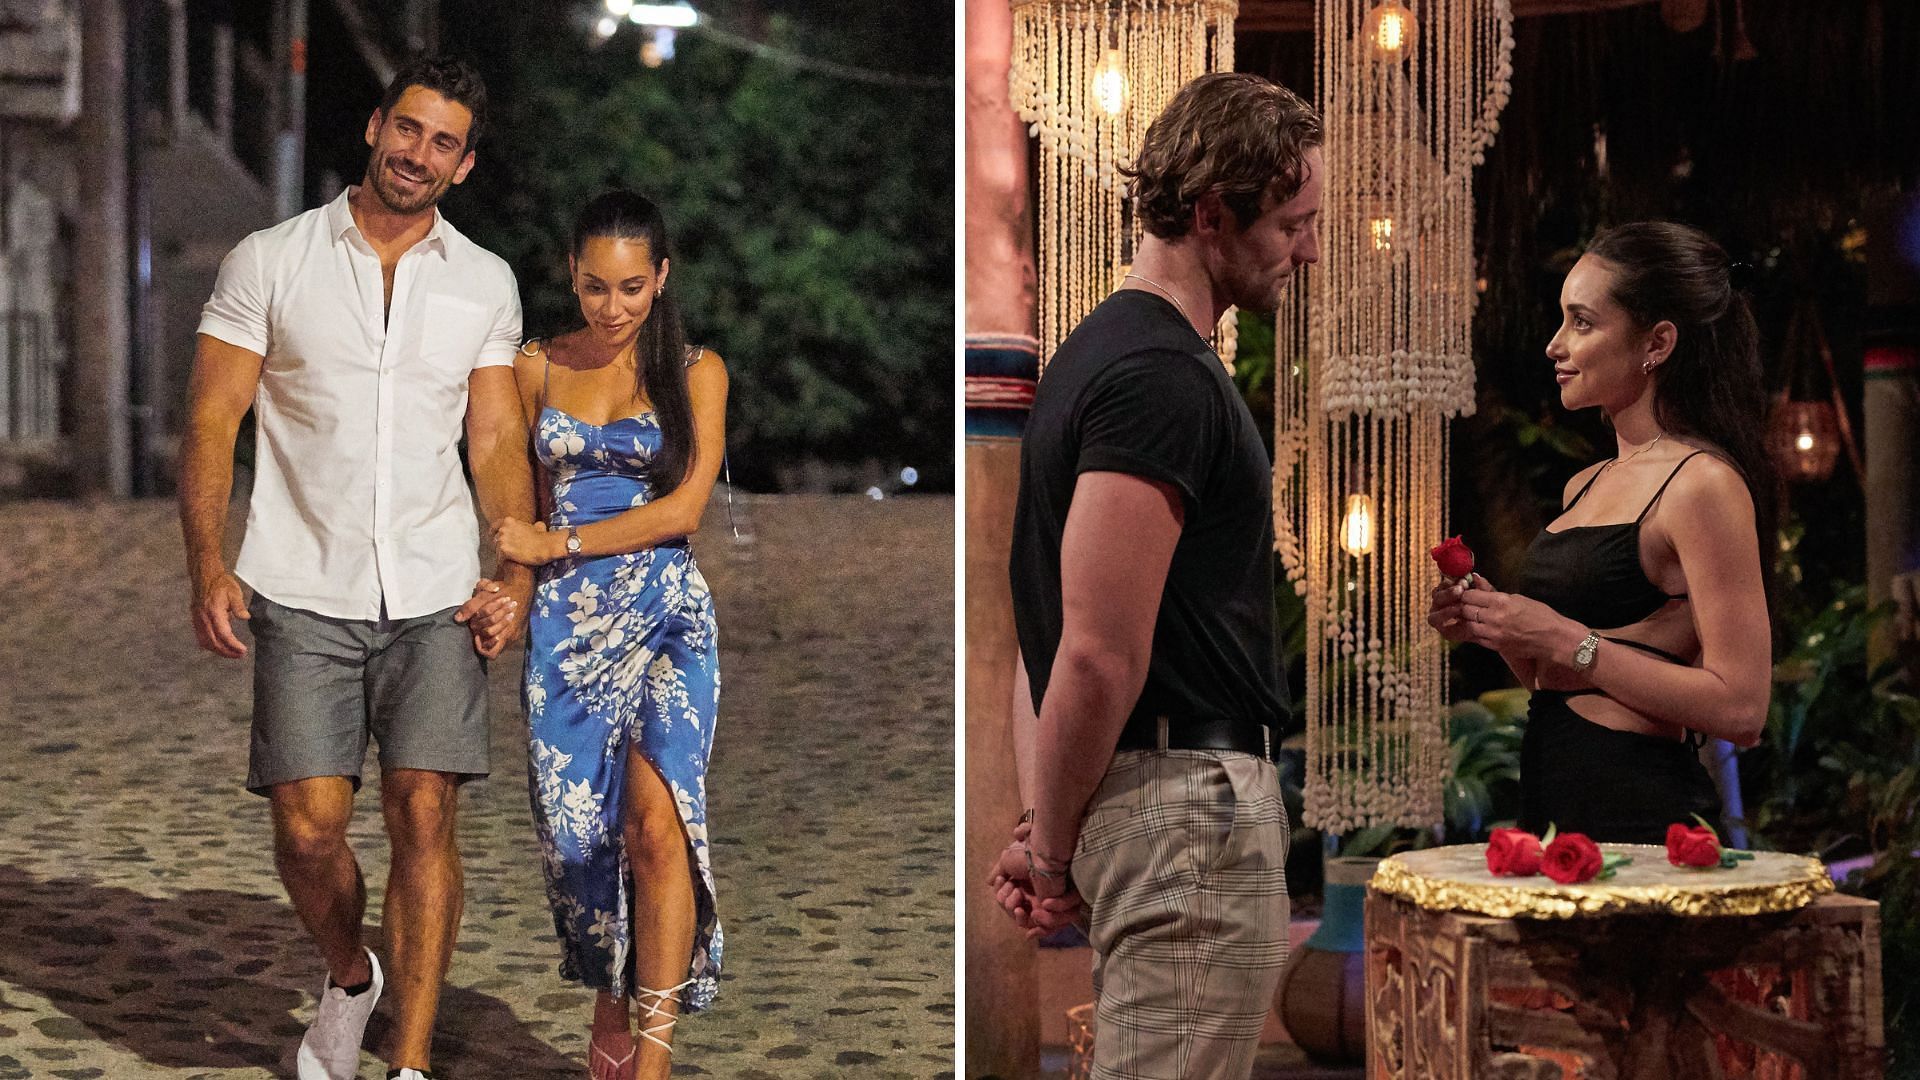 Fans prefer Alex over Johnny for Victoria on Bachelor in Paradise